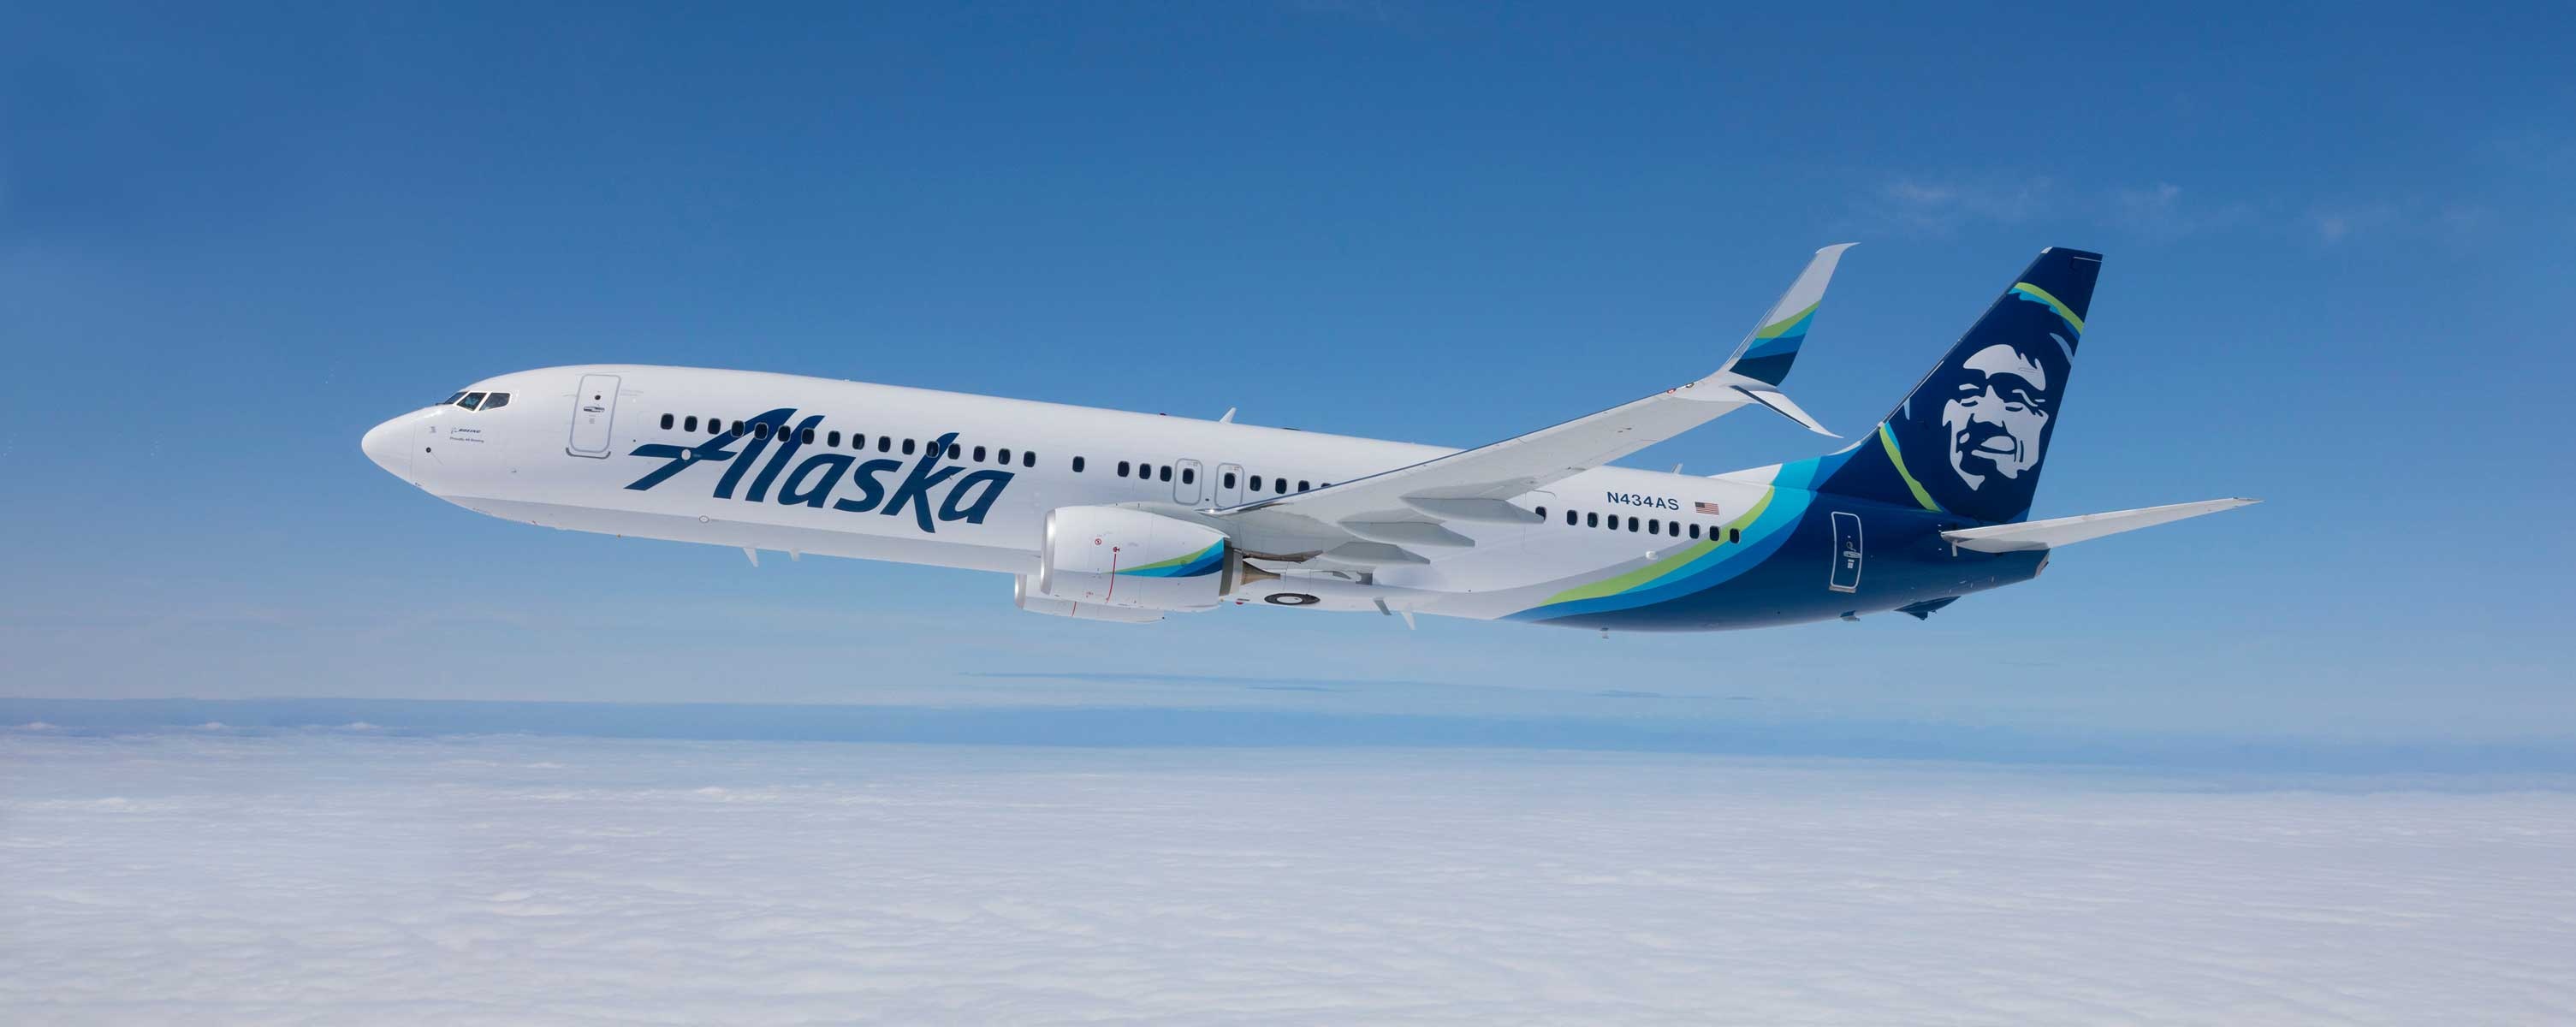 Alaska Airlines, Gold standard of airline mergers, Smooth transition, Merging companies, 3010x1200 Dual Screen Desktop